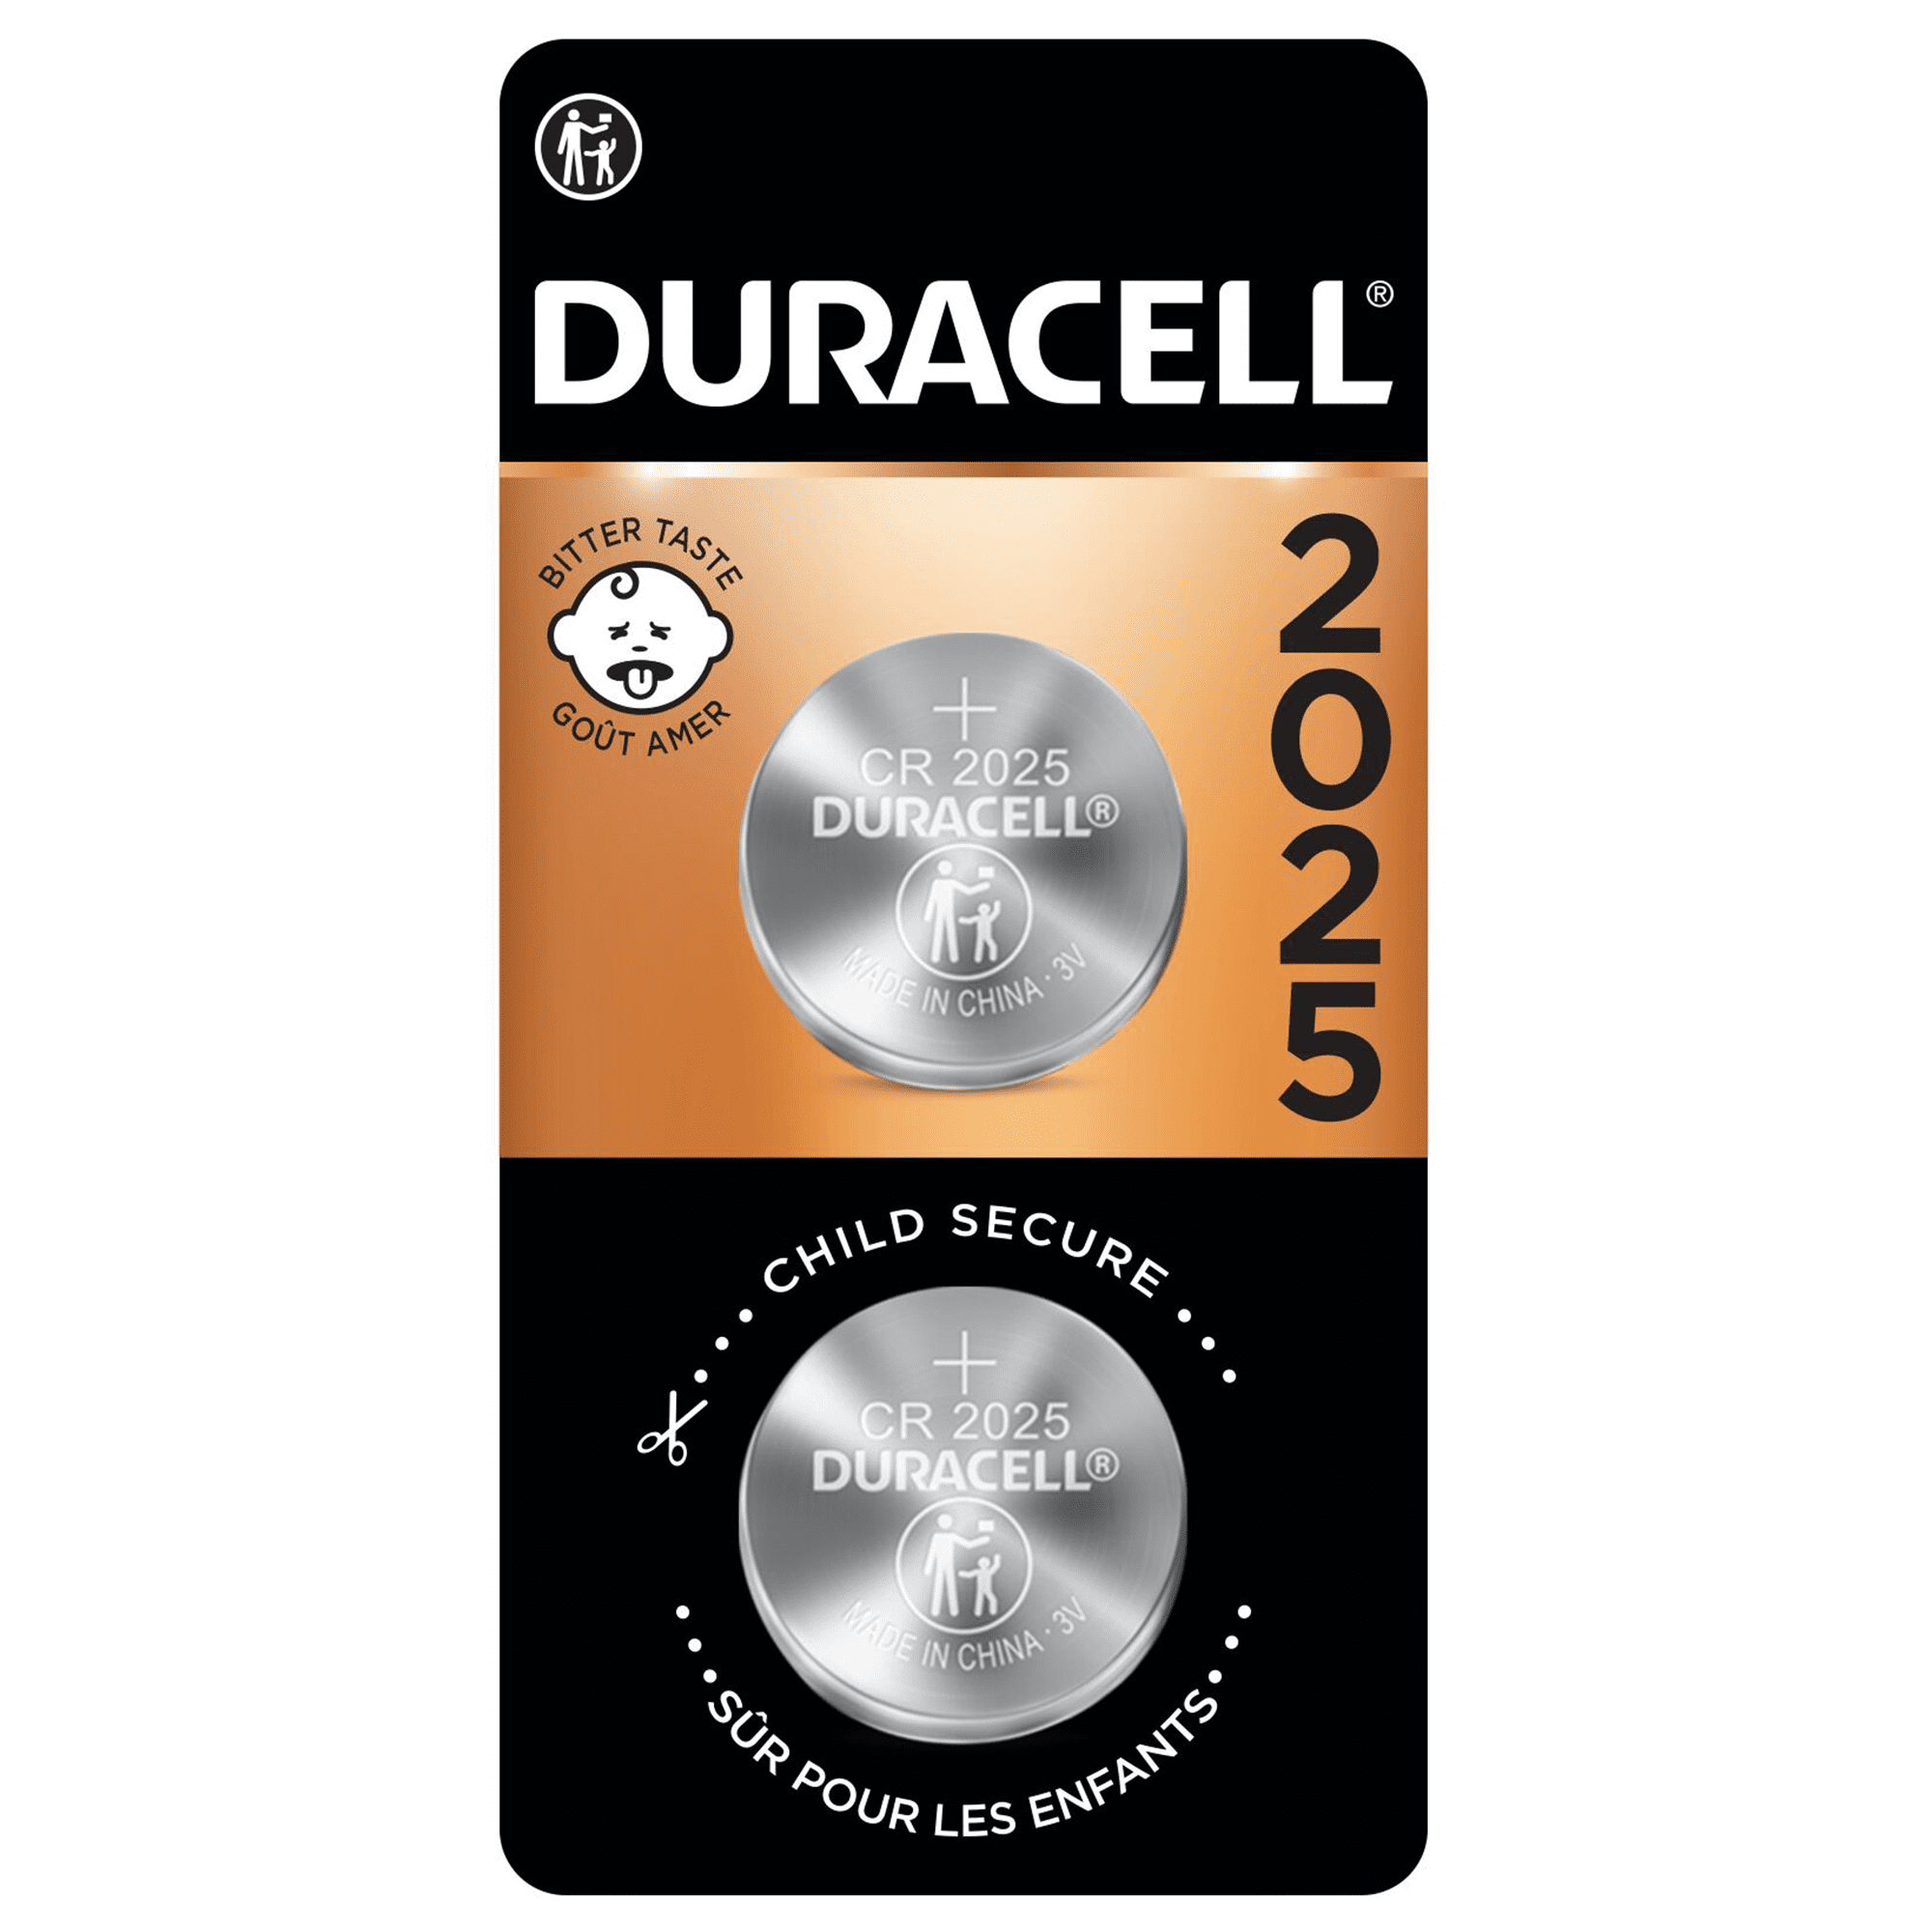 duracell lithium battery